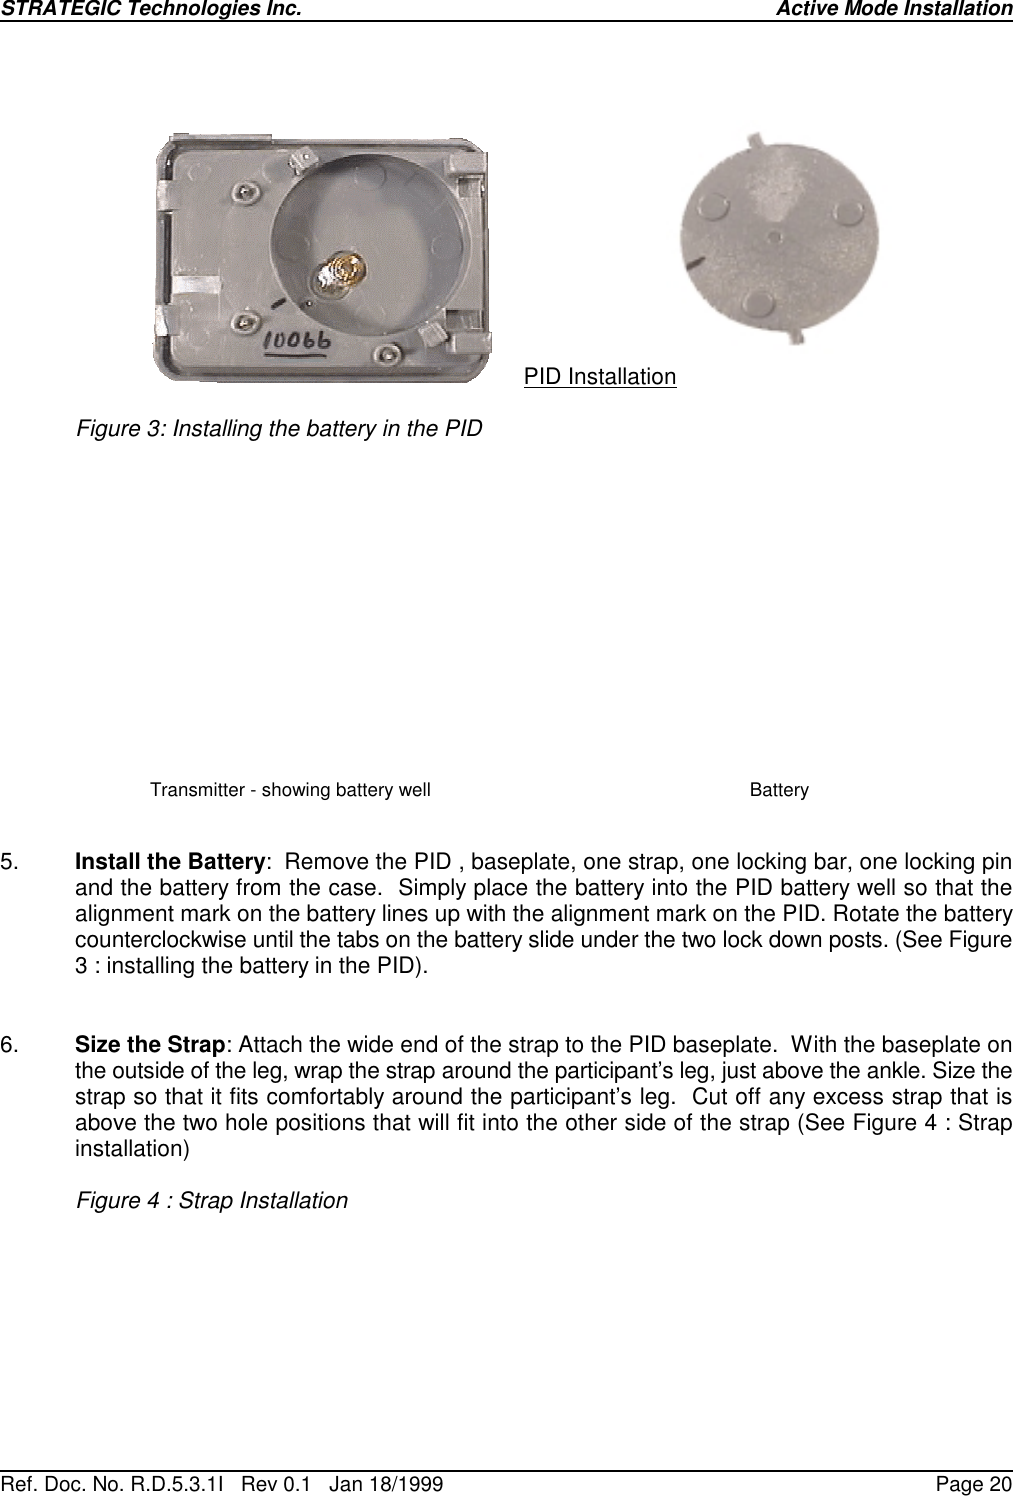 STRATEGIC Technologies Inc.Ref. Doc. No. R.D.5.3.1I   Rev 0.1   Jan 18/1999 Active Mode InstallationPage 20PID InstallationFigure 3: Installing the battery in the PIDTransmitter - showing battery well Battery5. Install the Battery:  Remove the PID , baseplate, one strap, one locking bar, one locking pinand the battery from the case.  Simply place the battery into the PID battery well so that thealignment mark on the battery lines up with the alignment mark on the PID. Rotate the batterycounterclockwise until the tabs on the battery slide under the two lock down posts. (See Figure3 : installing the battery in the PID). 6. Size the Strap: Attach the wide end of the strap to the PID baseplate.  With the baseplate onthe outside of the leg, wrap the strap around the participant’s leg, just above the ankle. Size thestrap so that it fits comfortably around the participant’s leg.  Cut off any excess strap that isabove the two hole positions that will fit into the other side of the strap (See Figure 4 : Strapinstallation)Figure 4 : Strap Installation